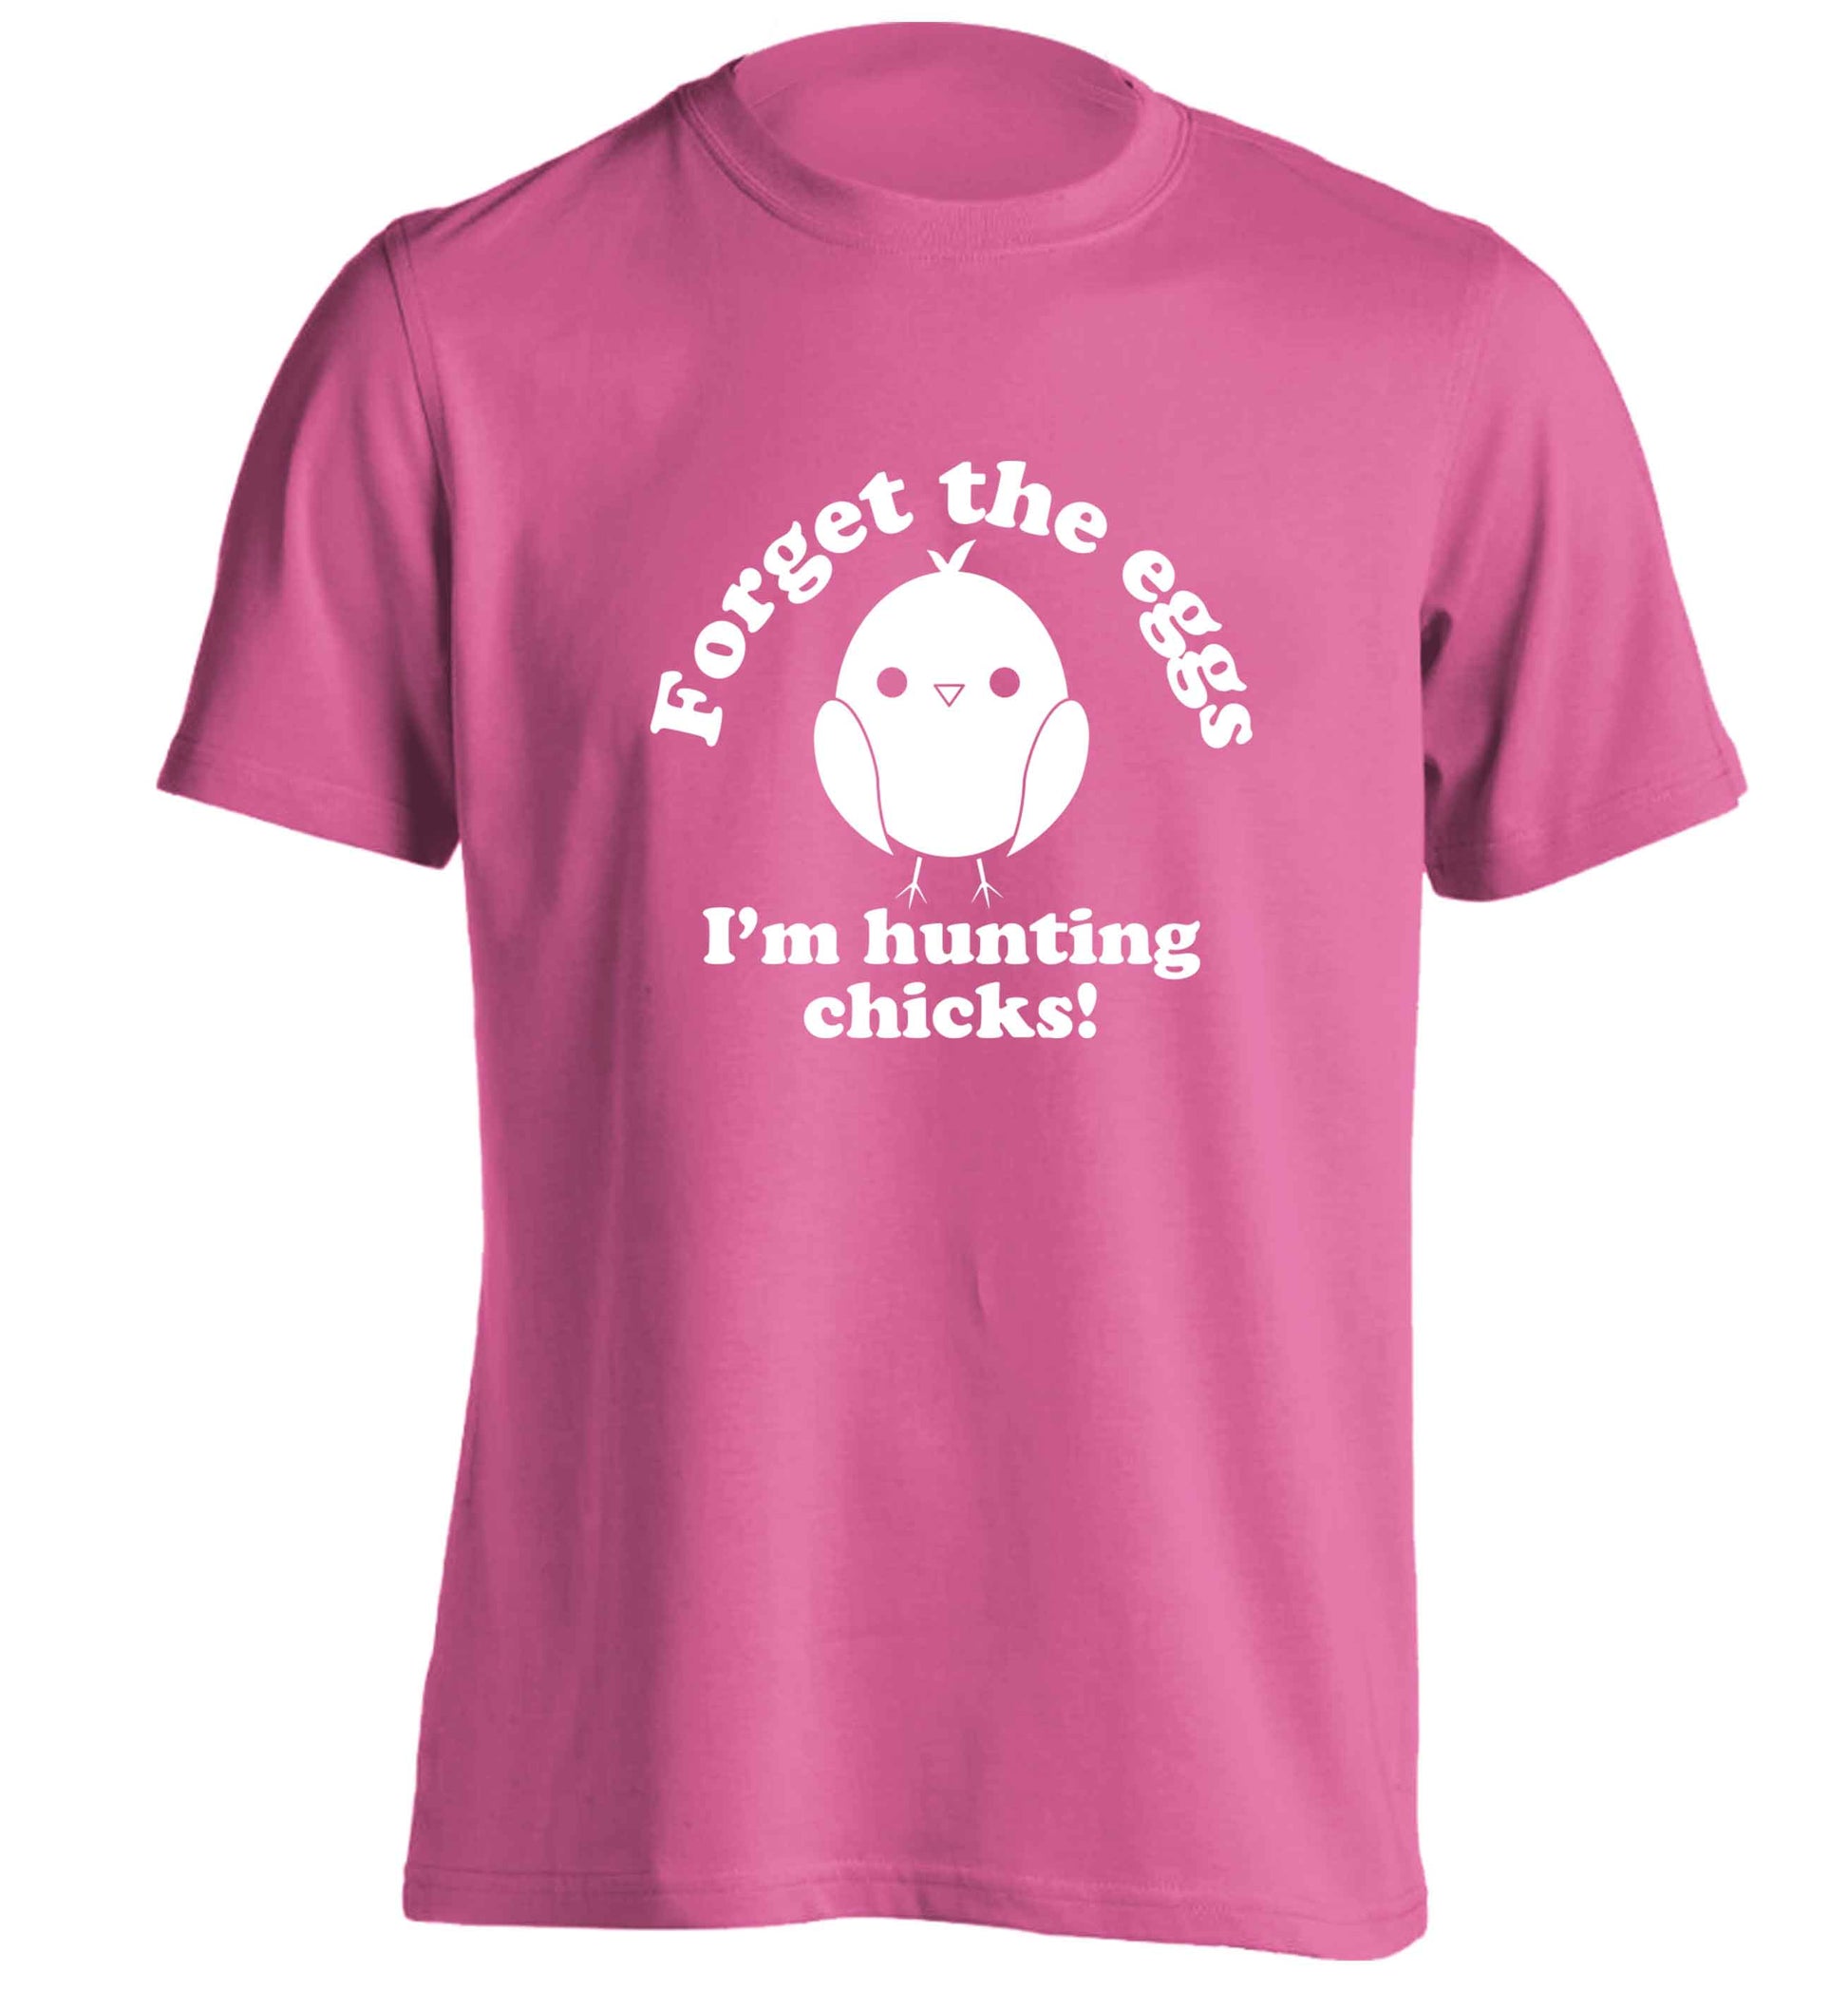 Forget the eggs I'm hunting chicks! adults unisex pink Tshirt 2XL